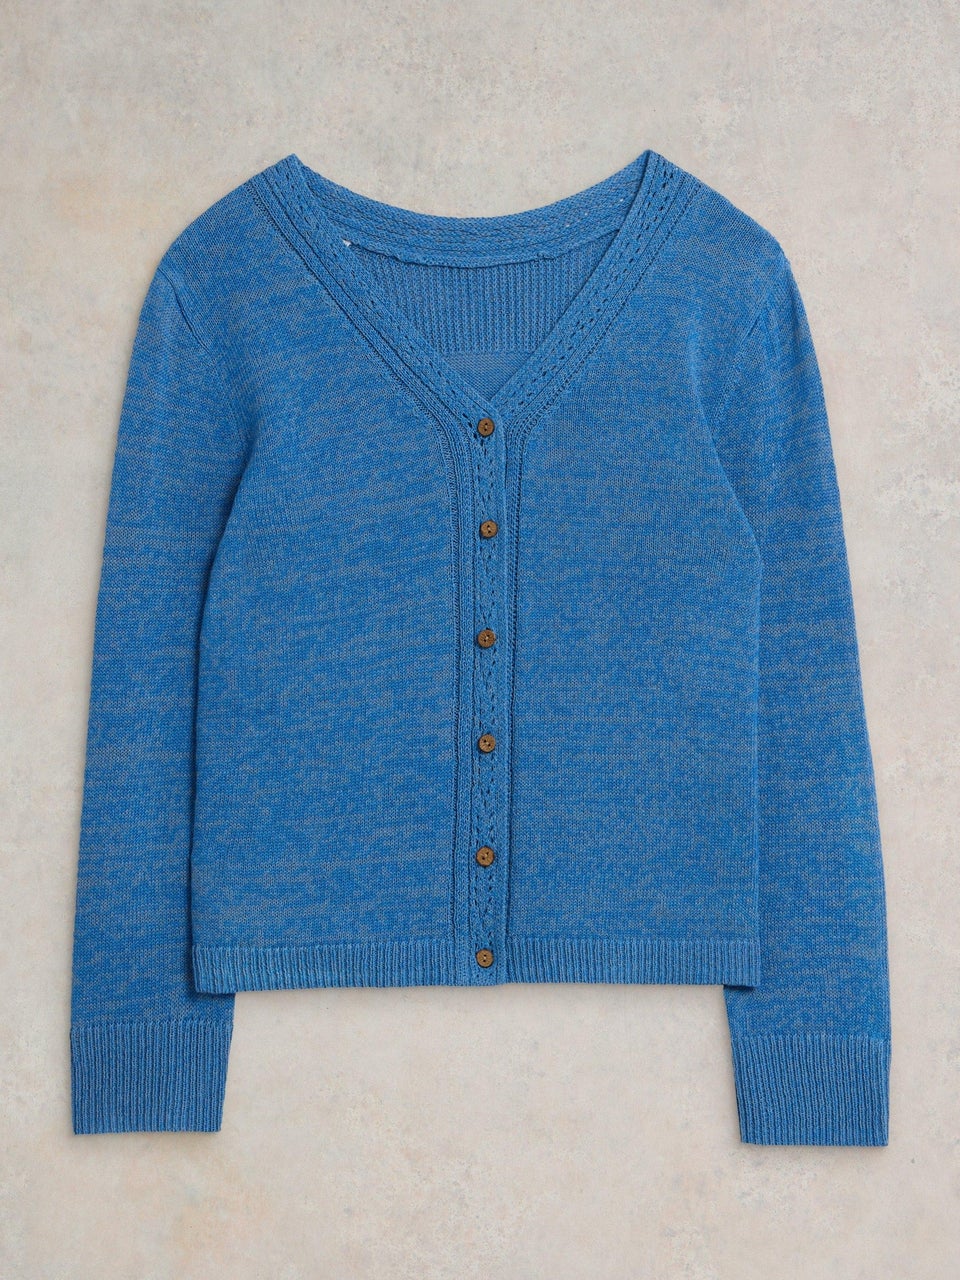 Heather Pullover